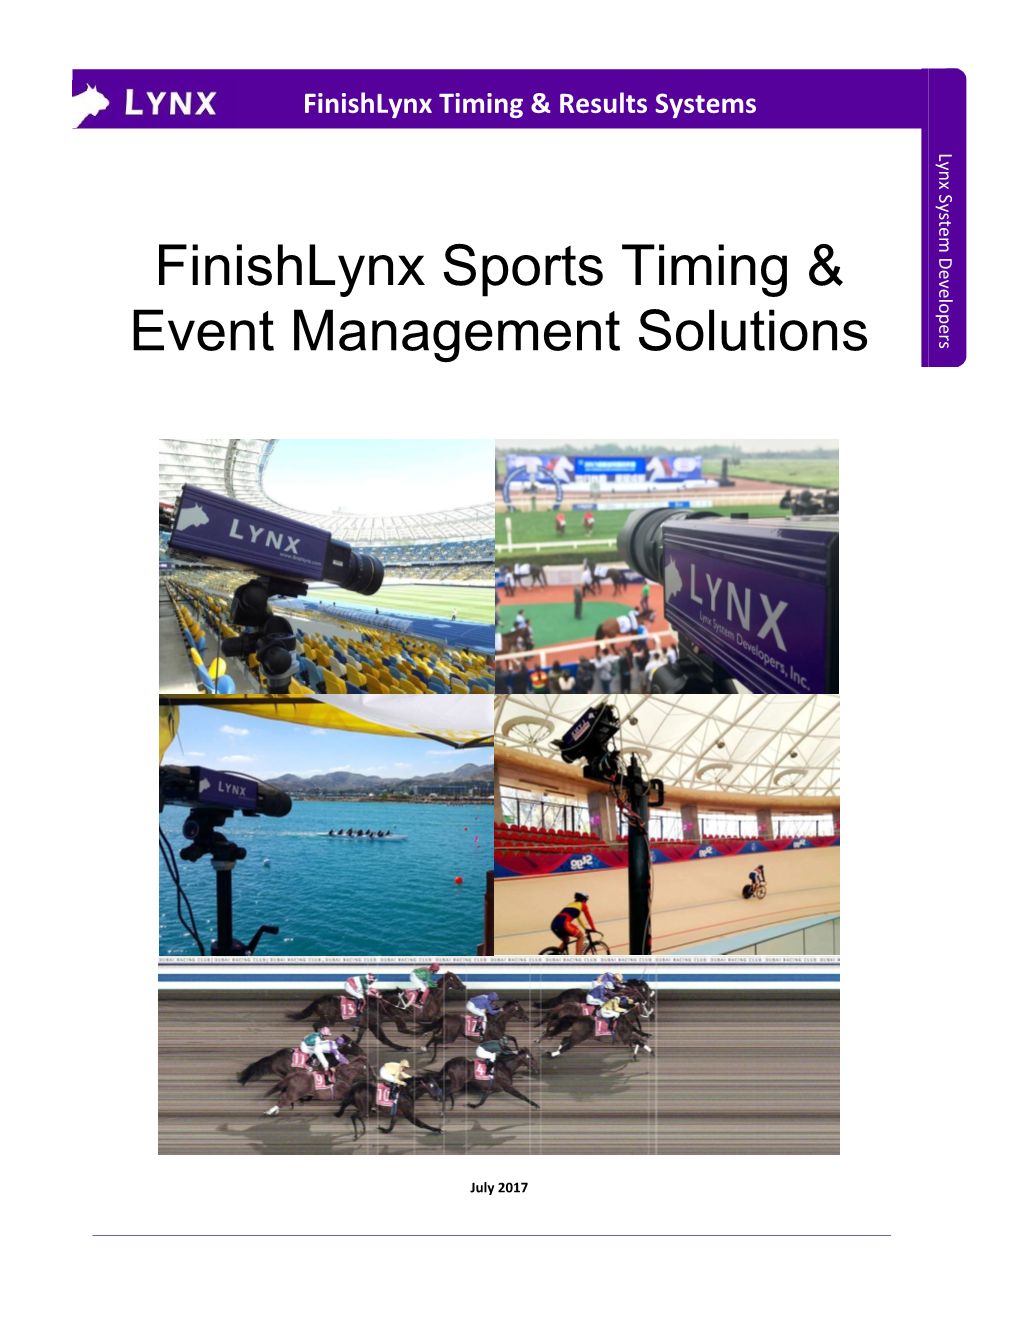 Finishlynx Sports Timing Systems